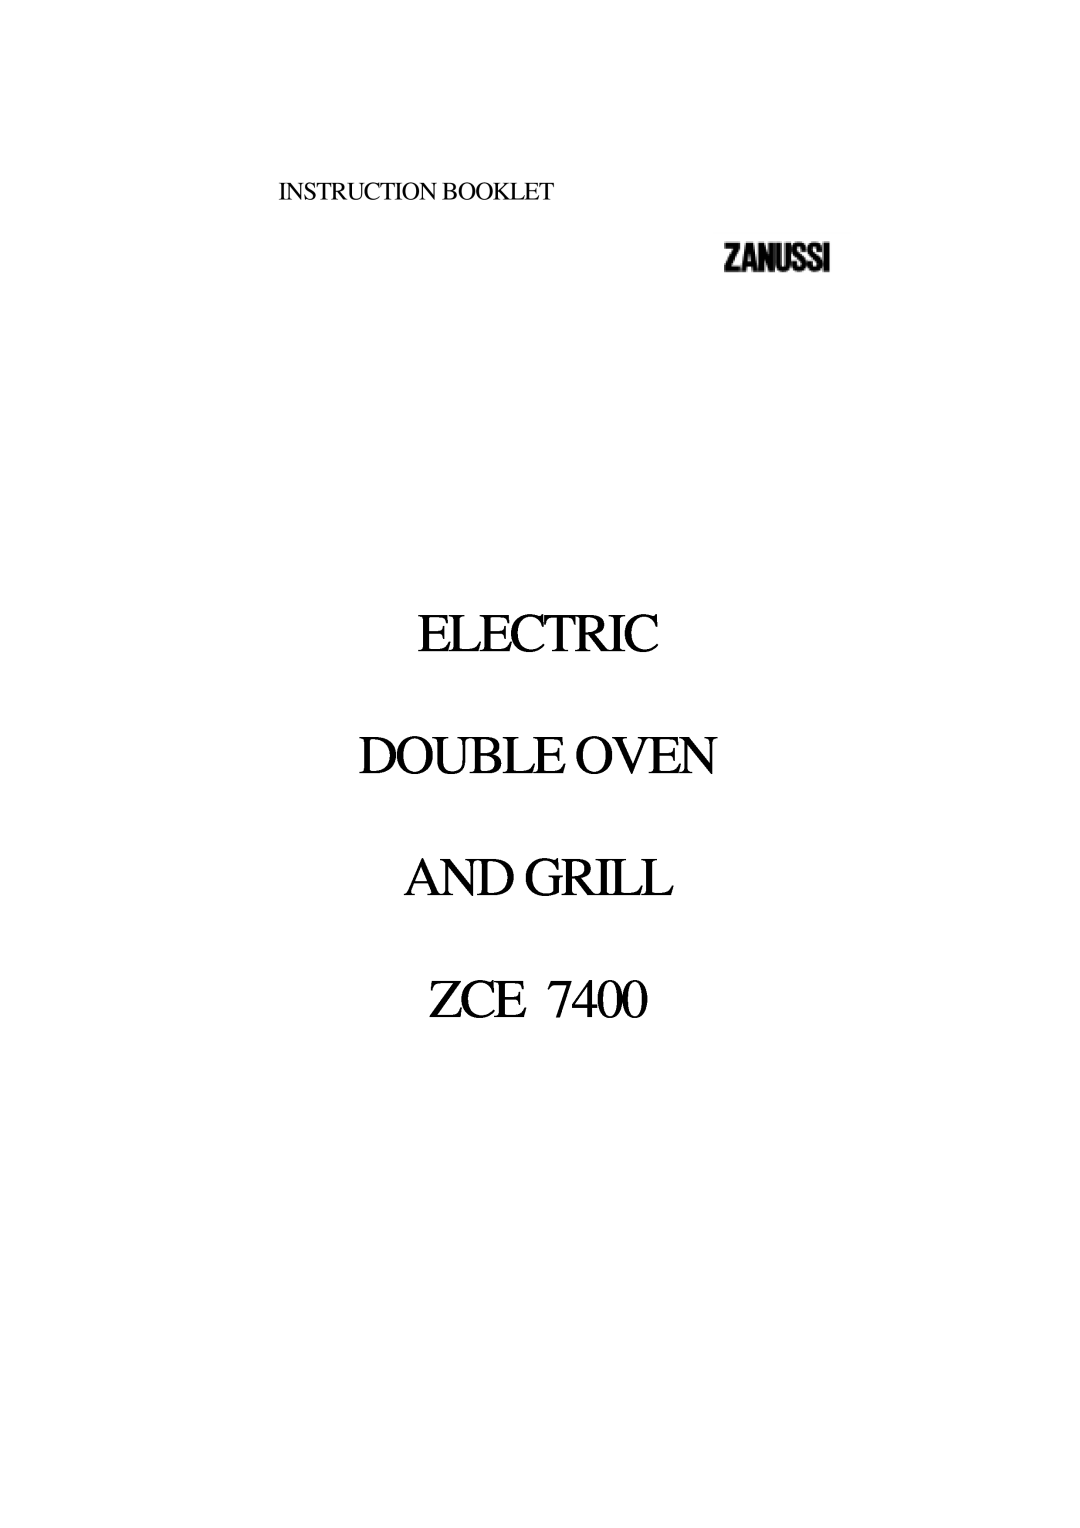 Zanussi ZCE 7400 manual Electric Double Oven And Grill Zce, Instruction Booklet 